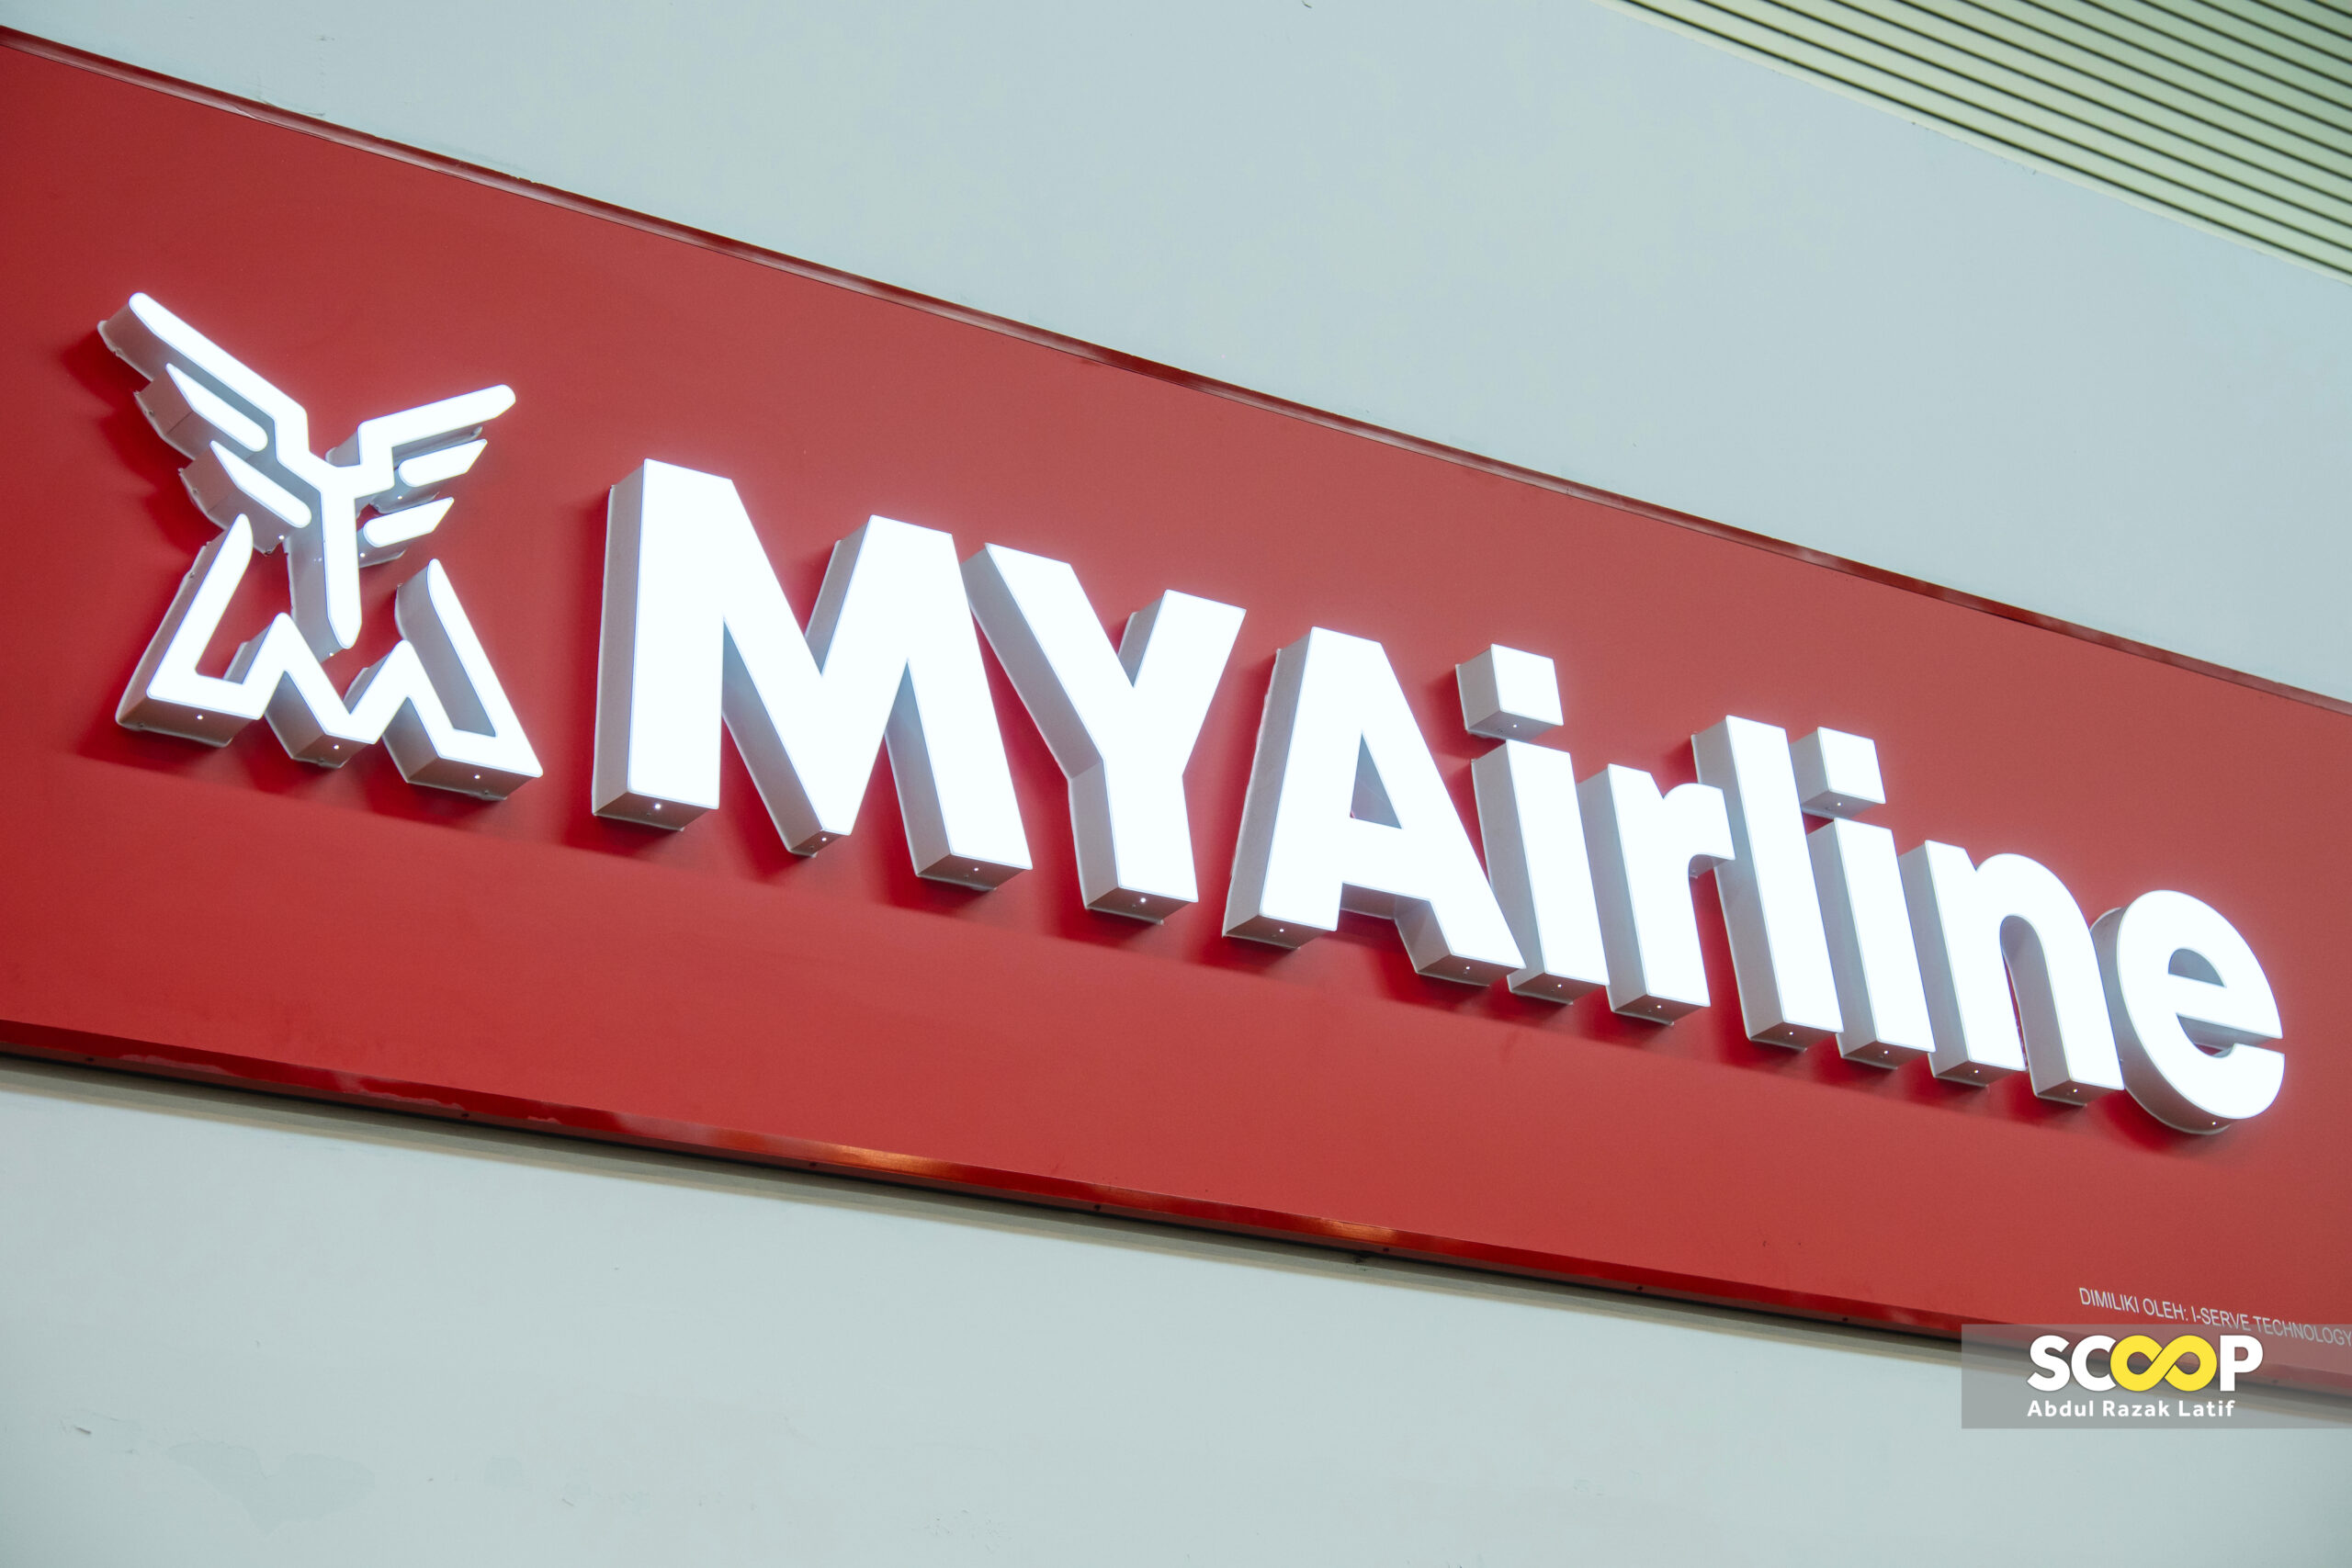 New horizons: MYAirline inks deal with Middle East investor